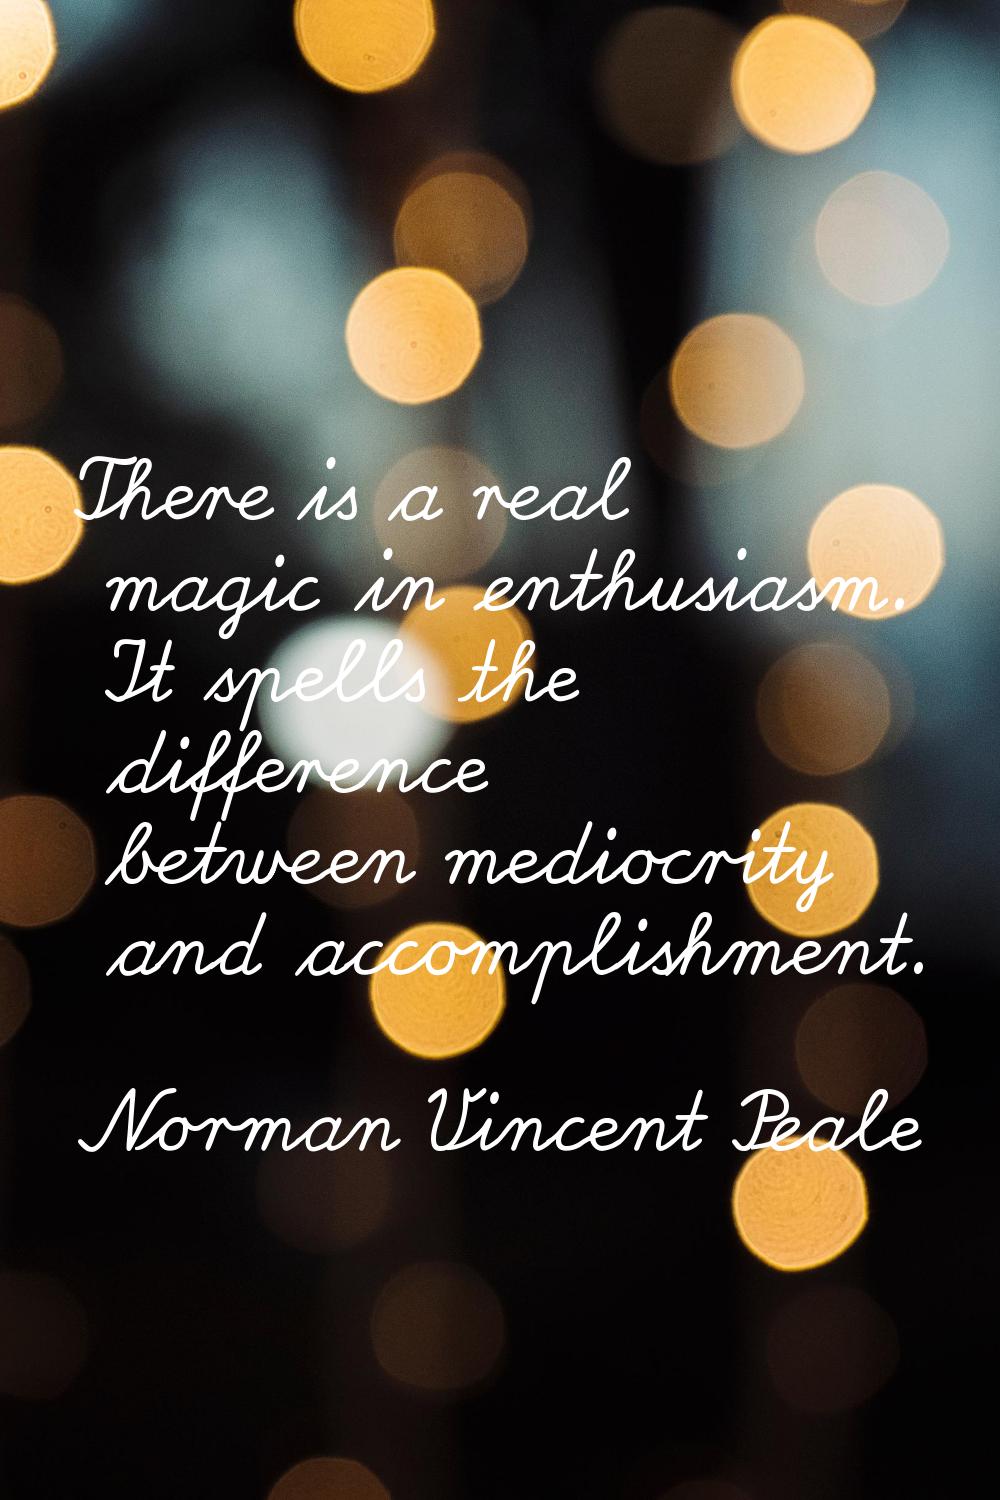 There is a real magic in enthusiasm. It spells the difference between mediocrity and accomplishment